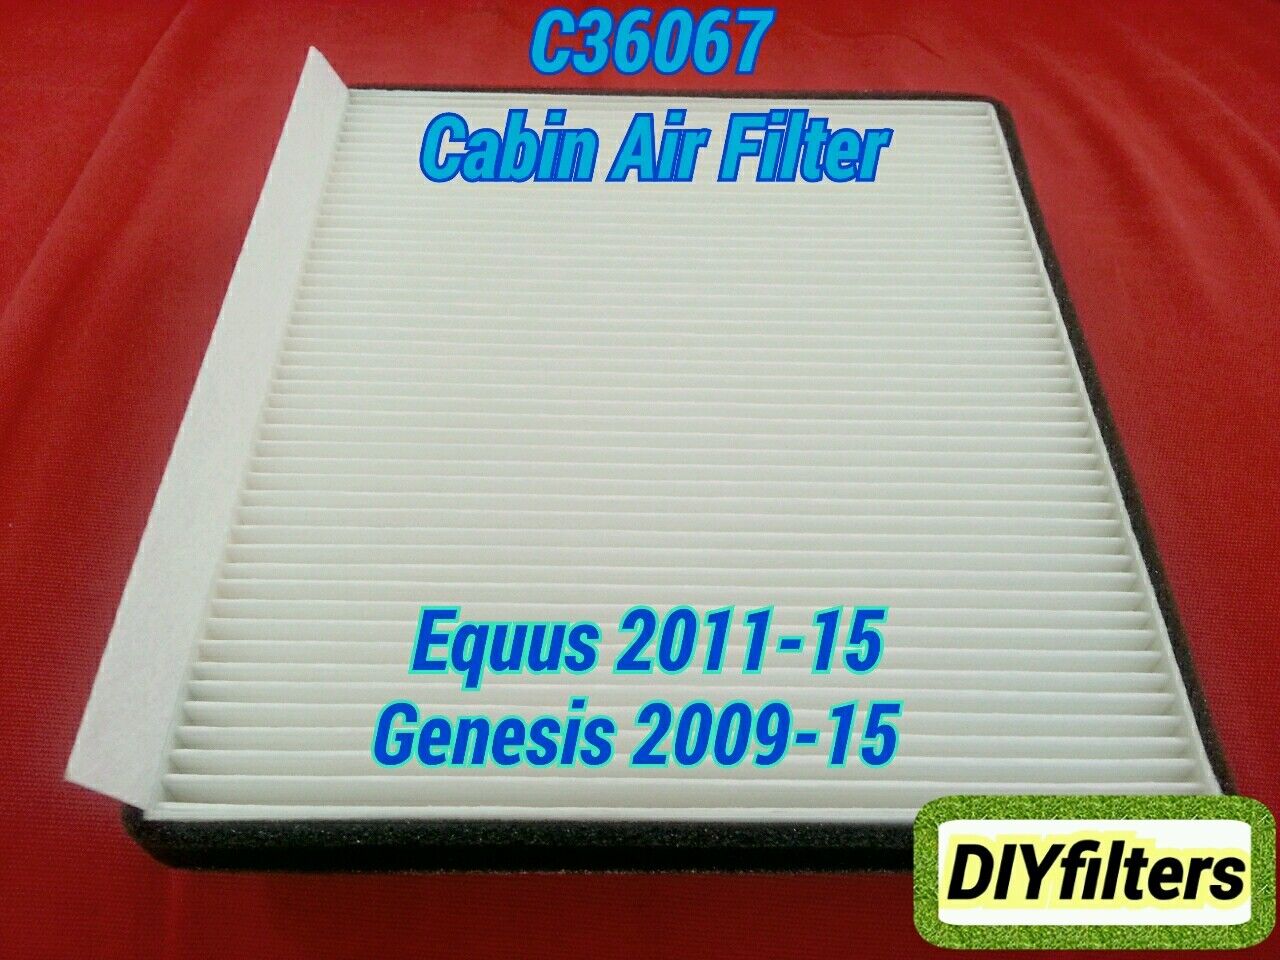 C36067 High Quality Cabin Air Filter for Equus 2011-15 & Genesis 2009-15